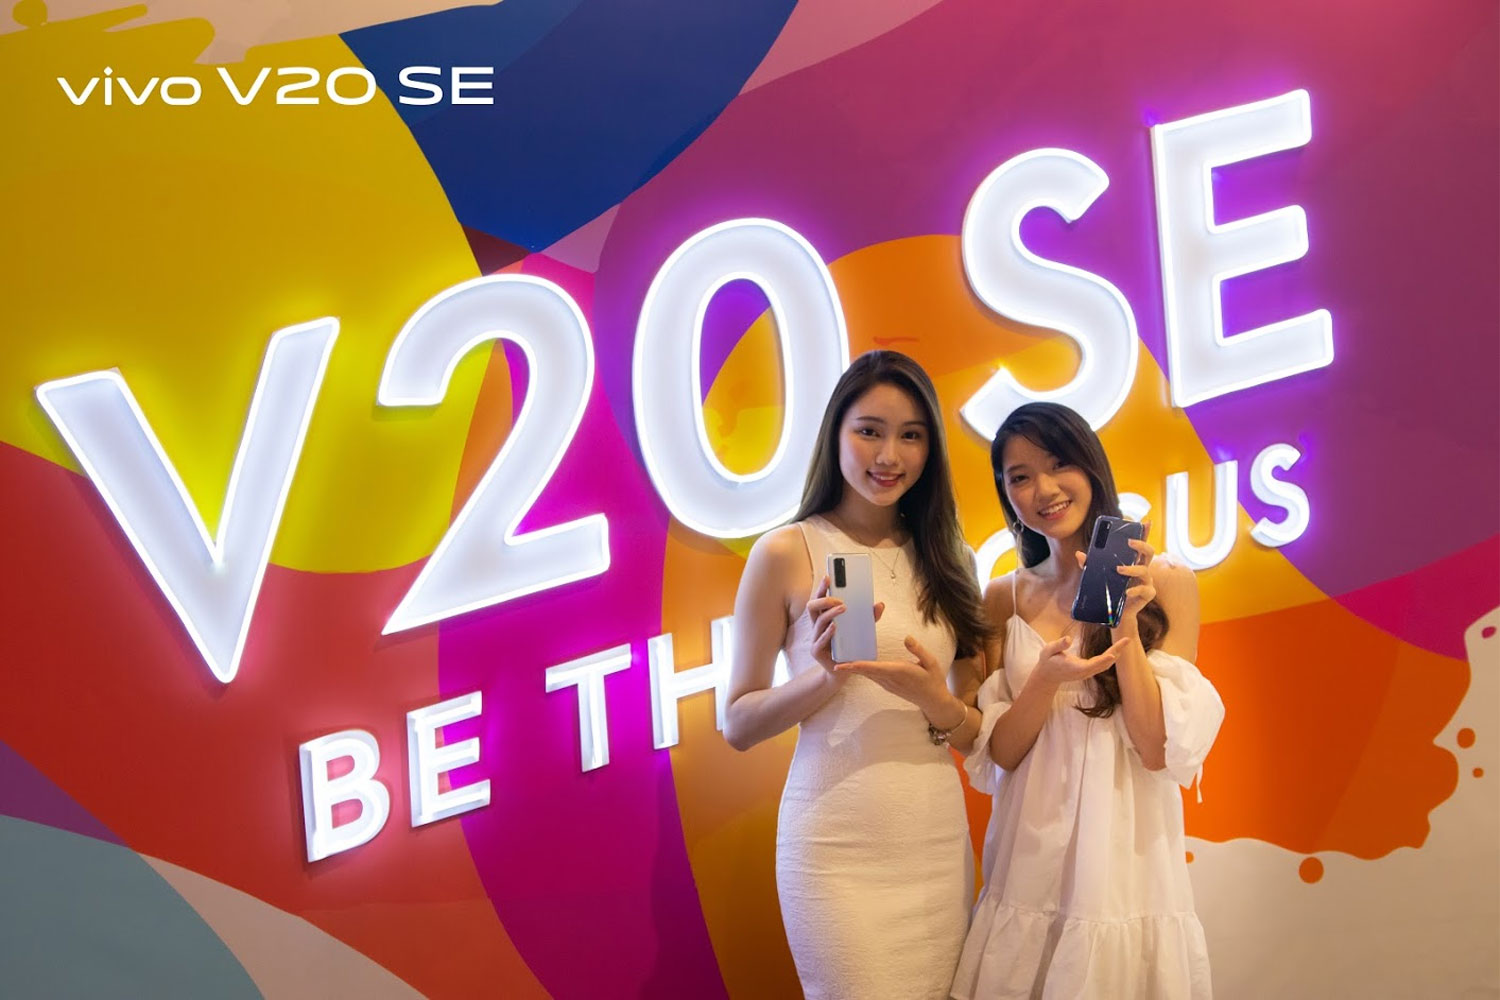 vivo V20 SE Officially Launched in Malaysia